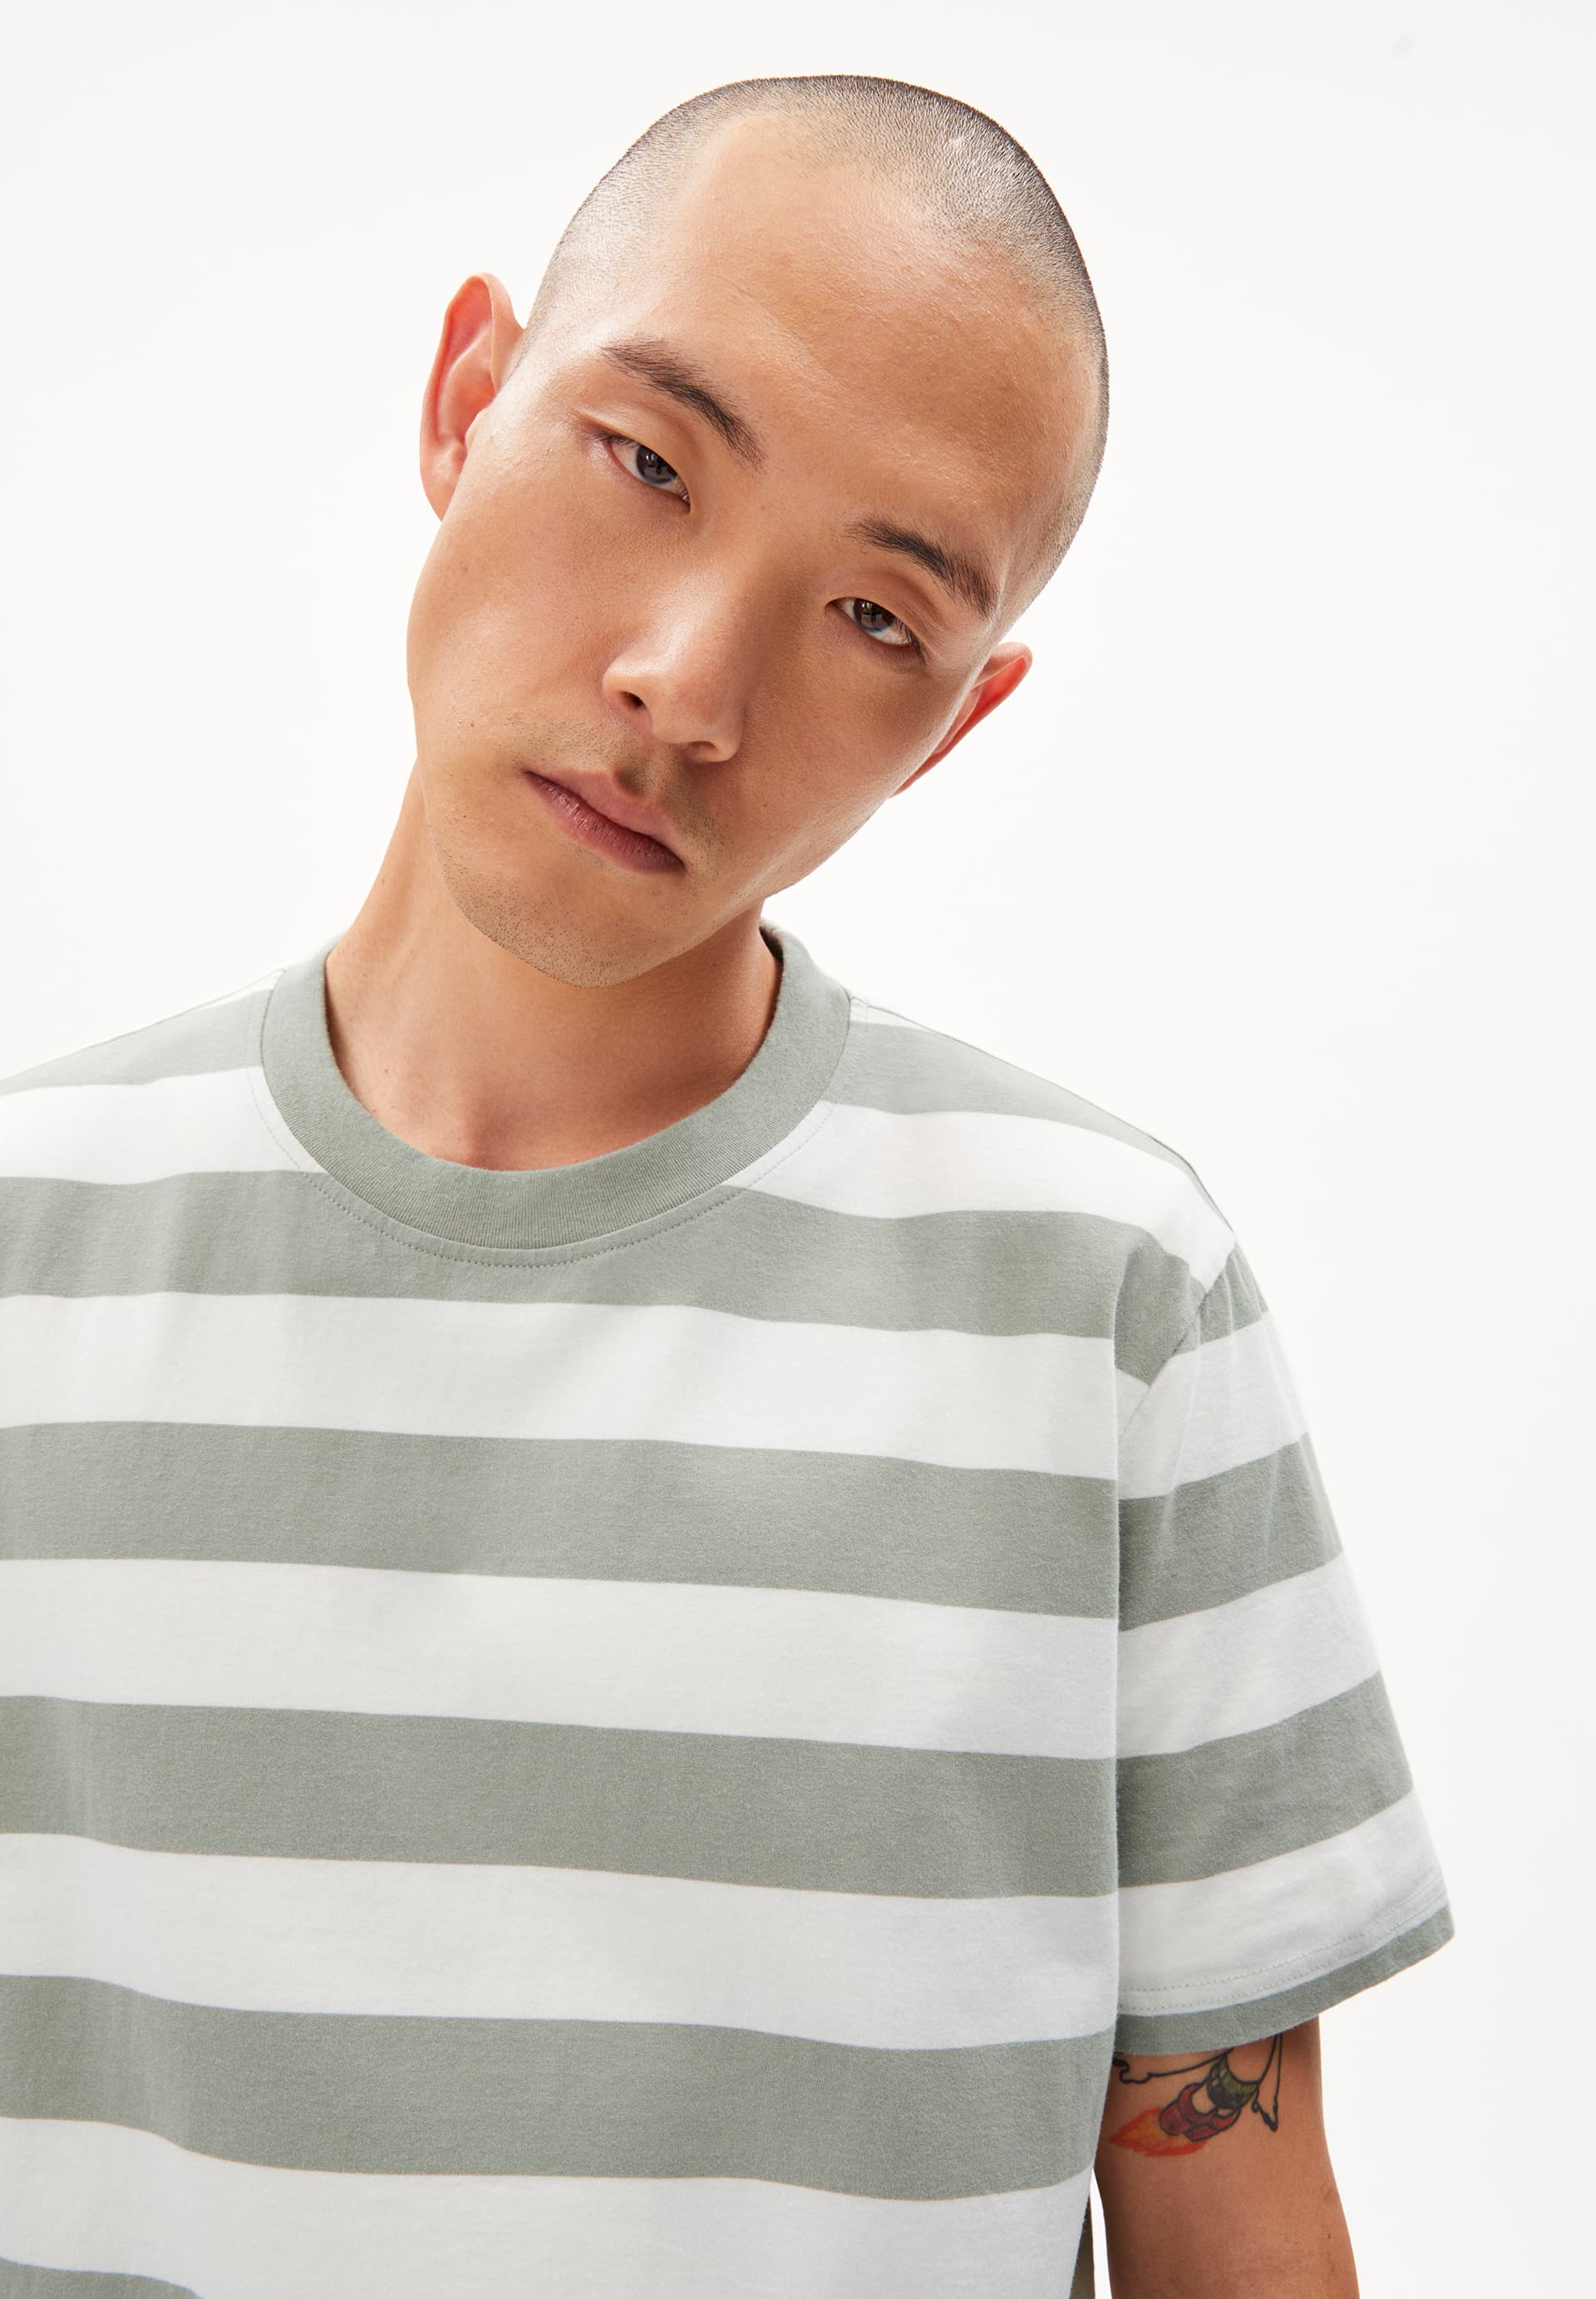 BAHAAR STRIPES T-Shirt Relaxed Fit made of Organic Cotton